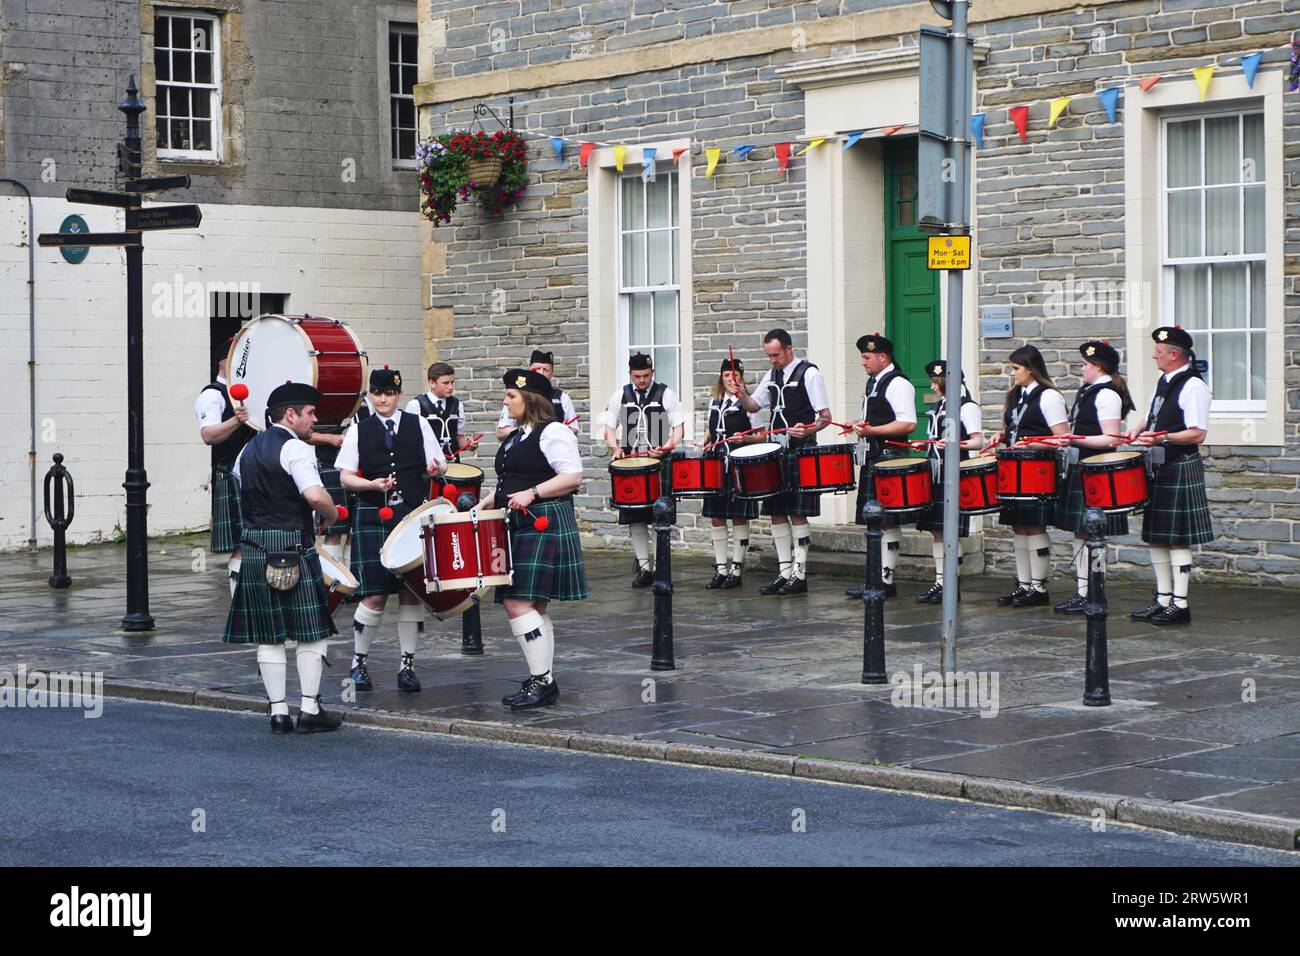 Male and female drummers from the Kirkwall City Pipe Band warm up before joining the group's bagpipers for a performance in the city center nearby Stock Photo